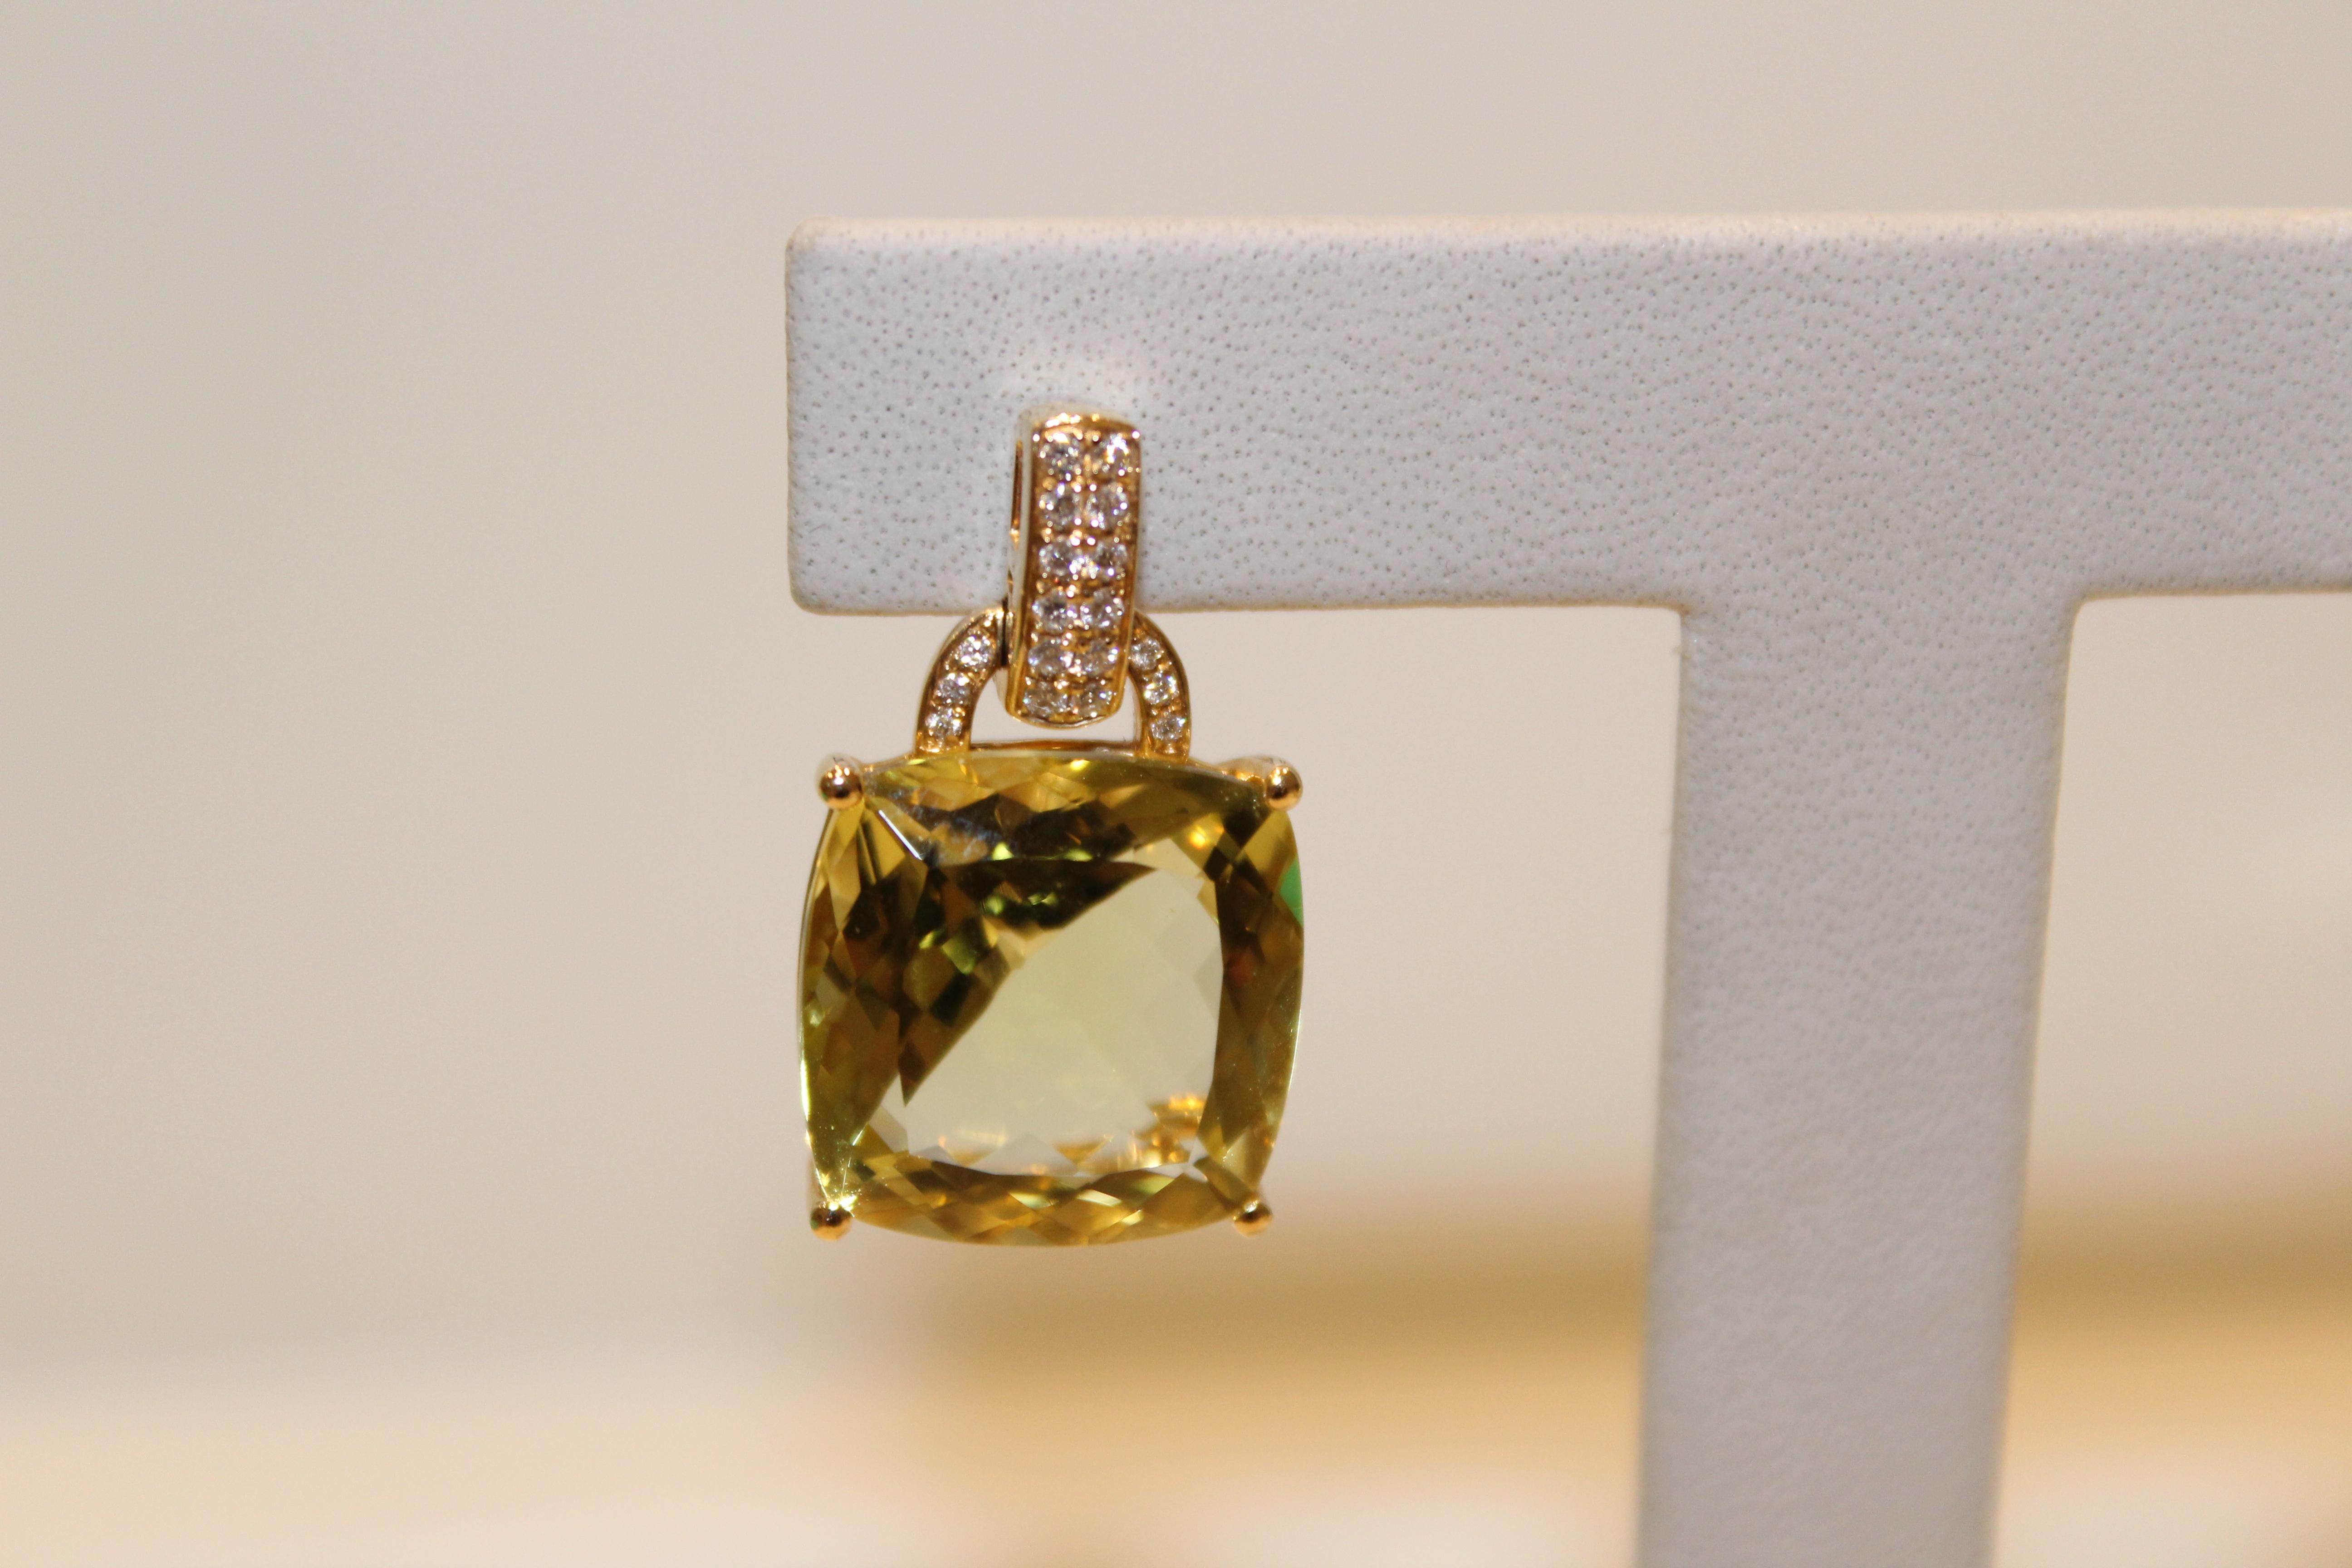 These earrings feature a central cushion-cut Lemon Quartz stone, that is held by an intricately designed 18ct Yellow Gold setting. The stone hangs from a post featuring two rows of pave Diamonds and a pave hoop. These earrings will bring light to